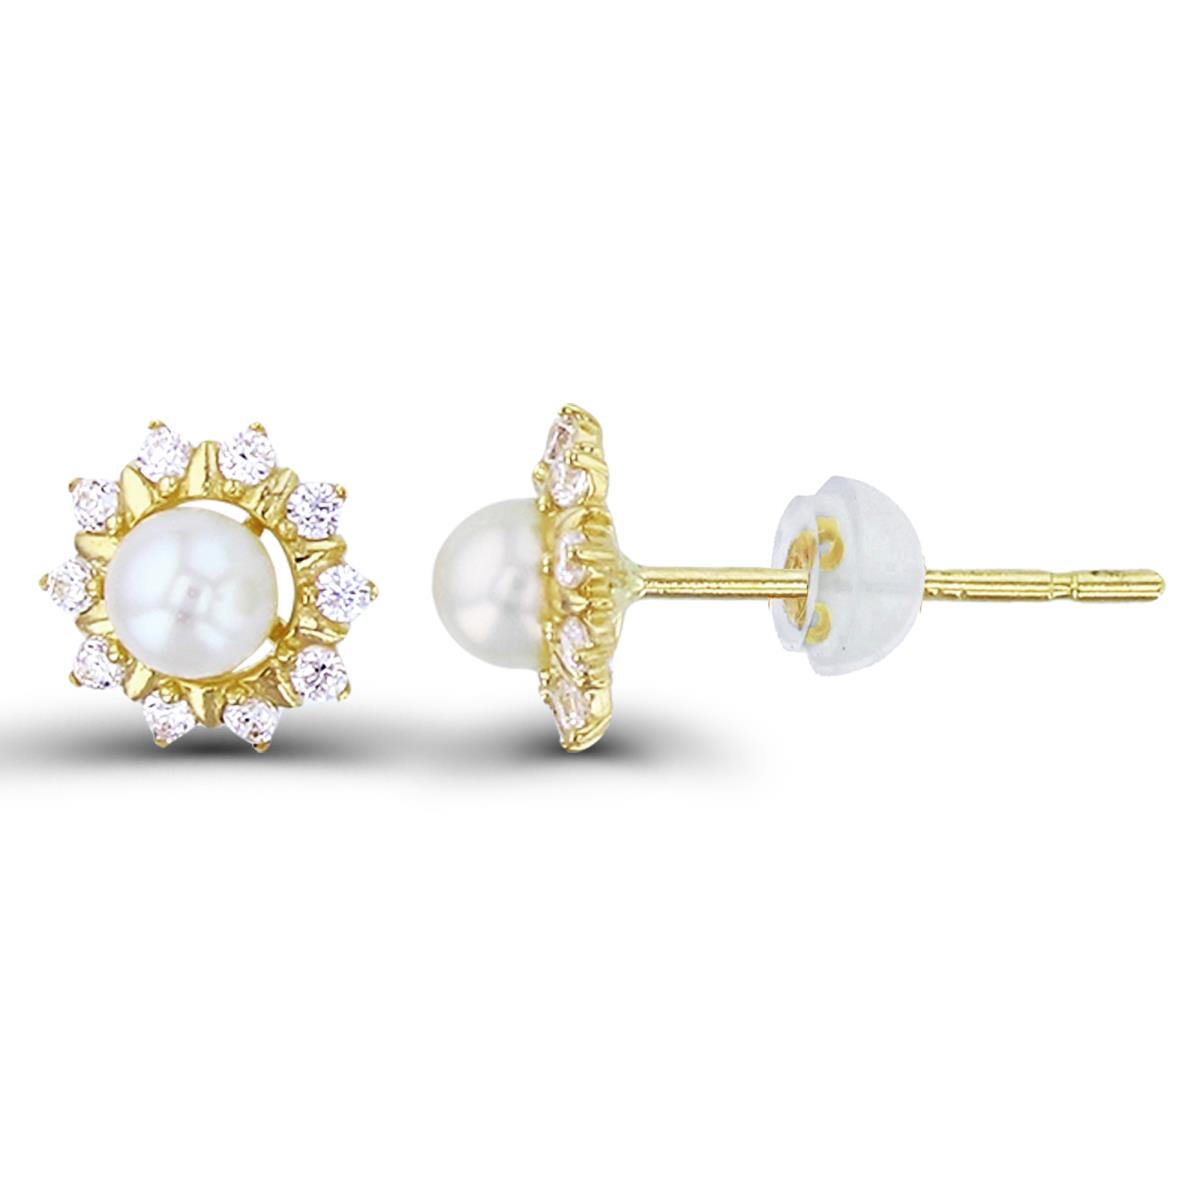 10K Yellow Gold 3mm Rnd Fresh Water Pearl & Rnd CZ Flower Studs with Silicon Backs